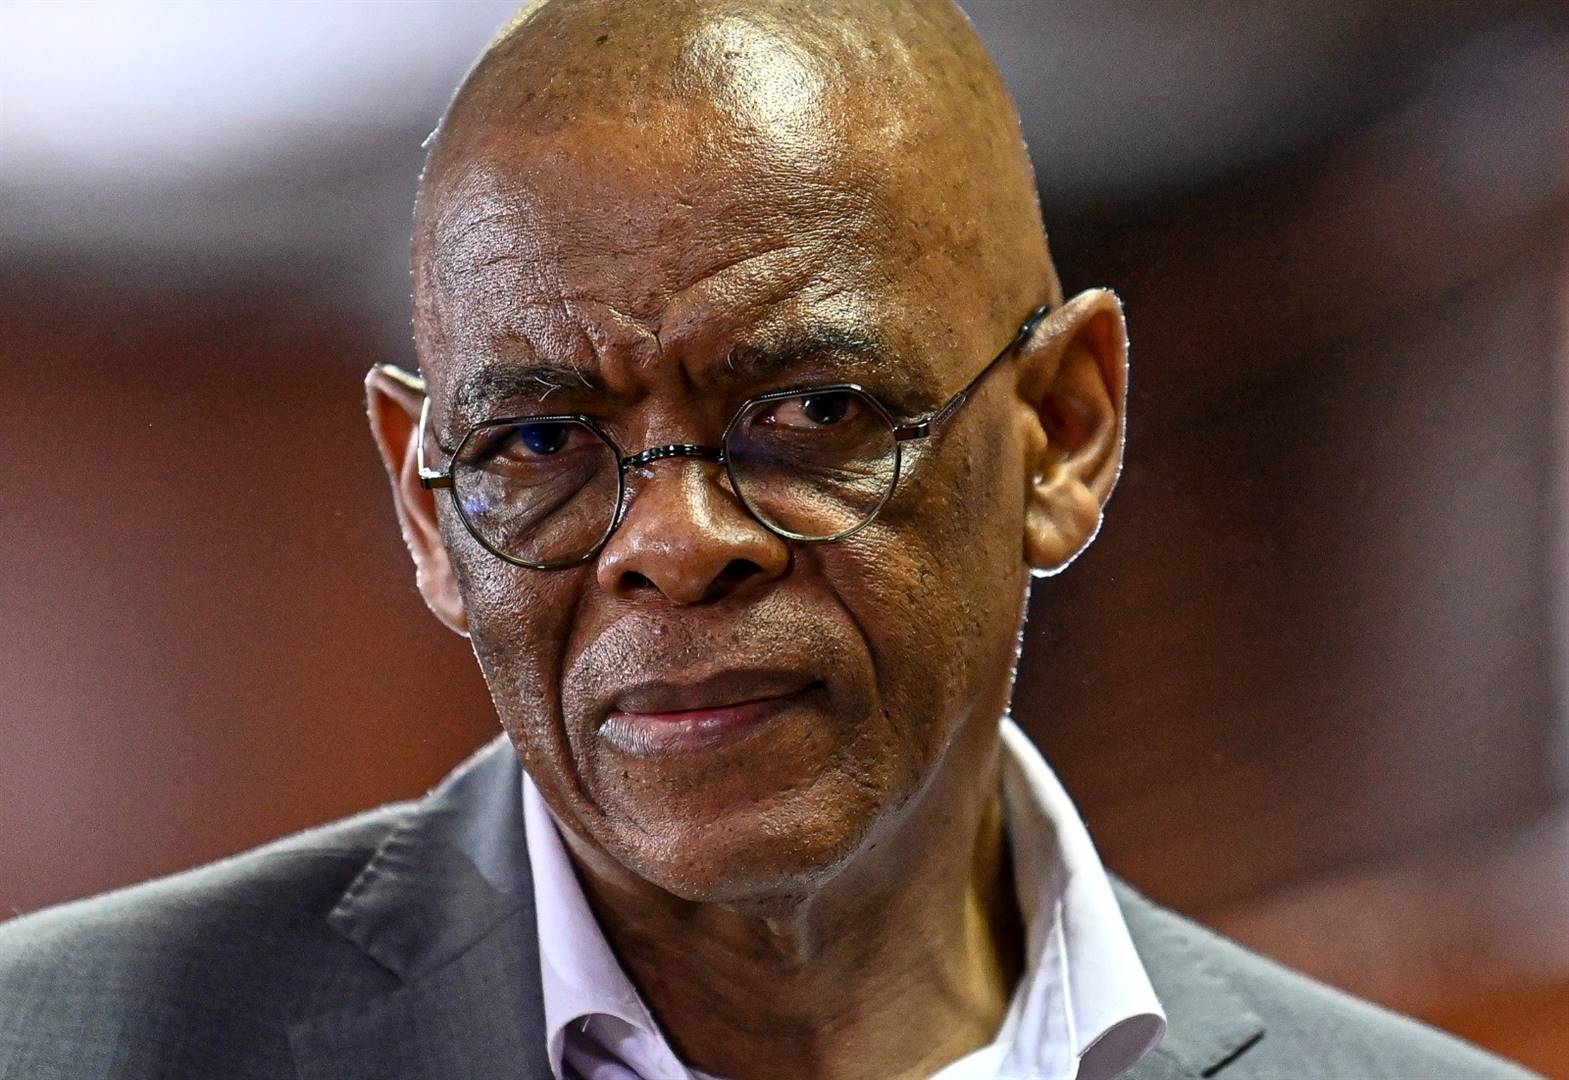 News24 | Ace Magashule's former PA approaches ConCourt to fight extradition request